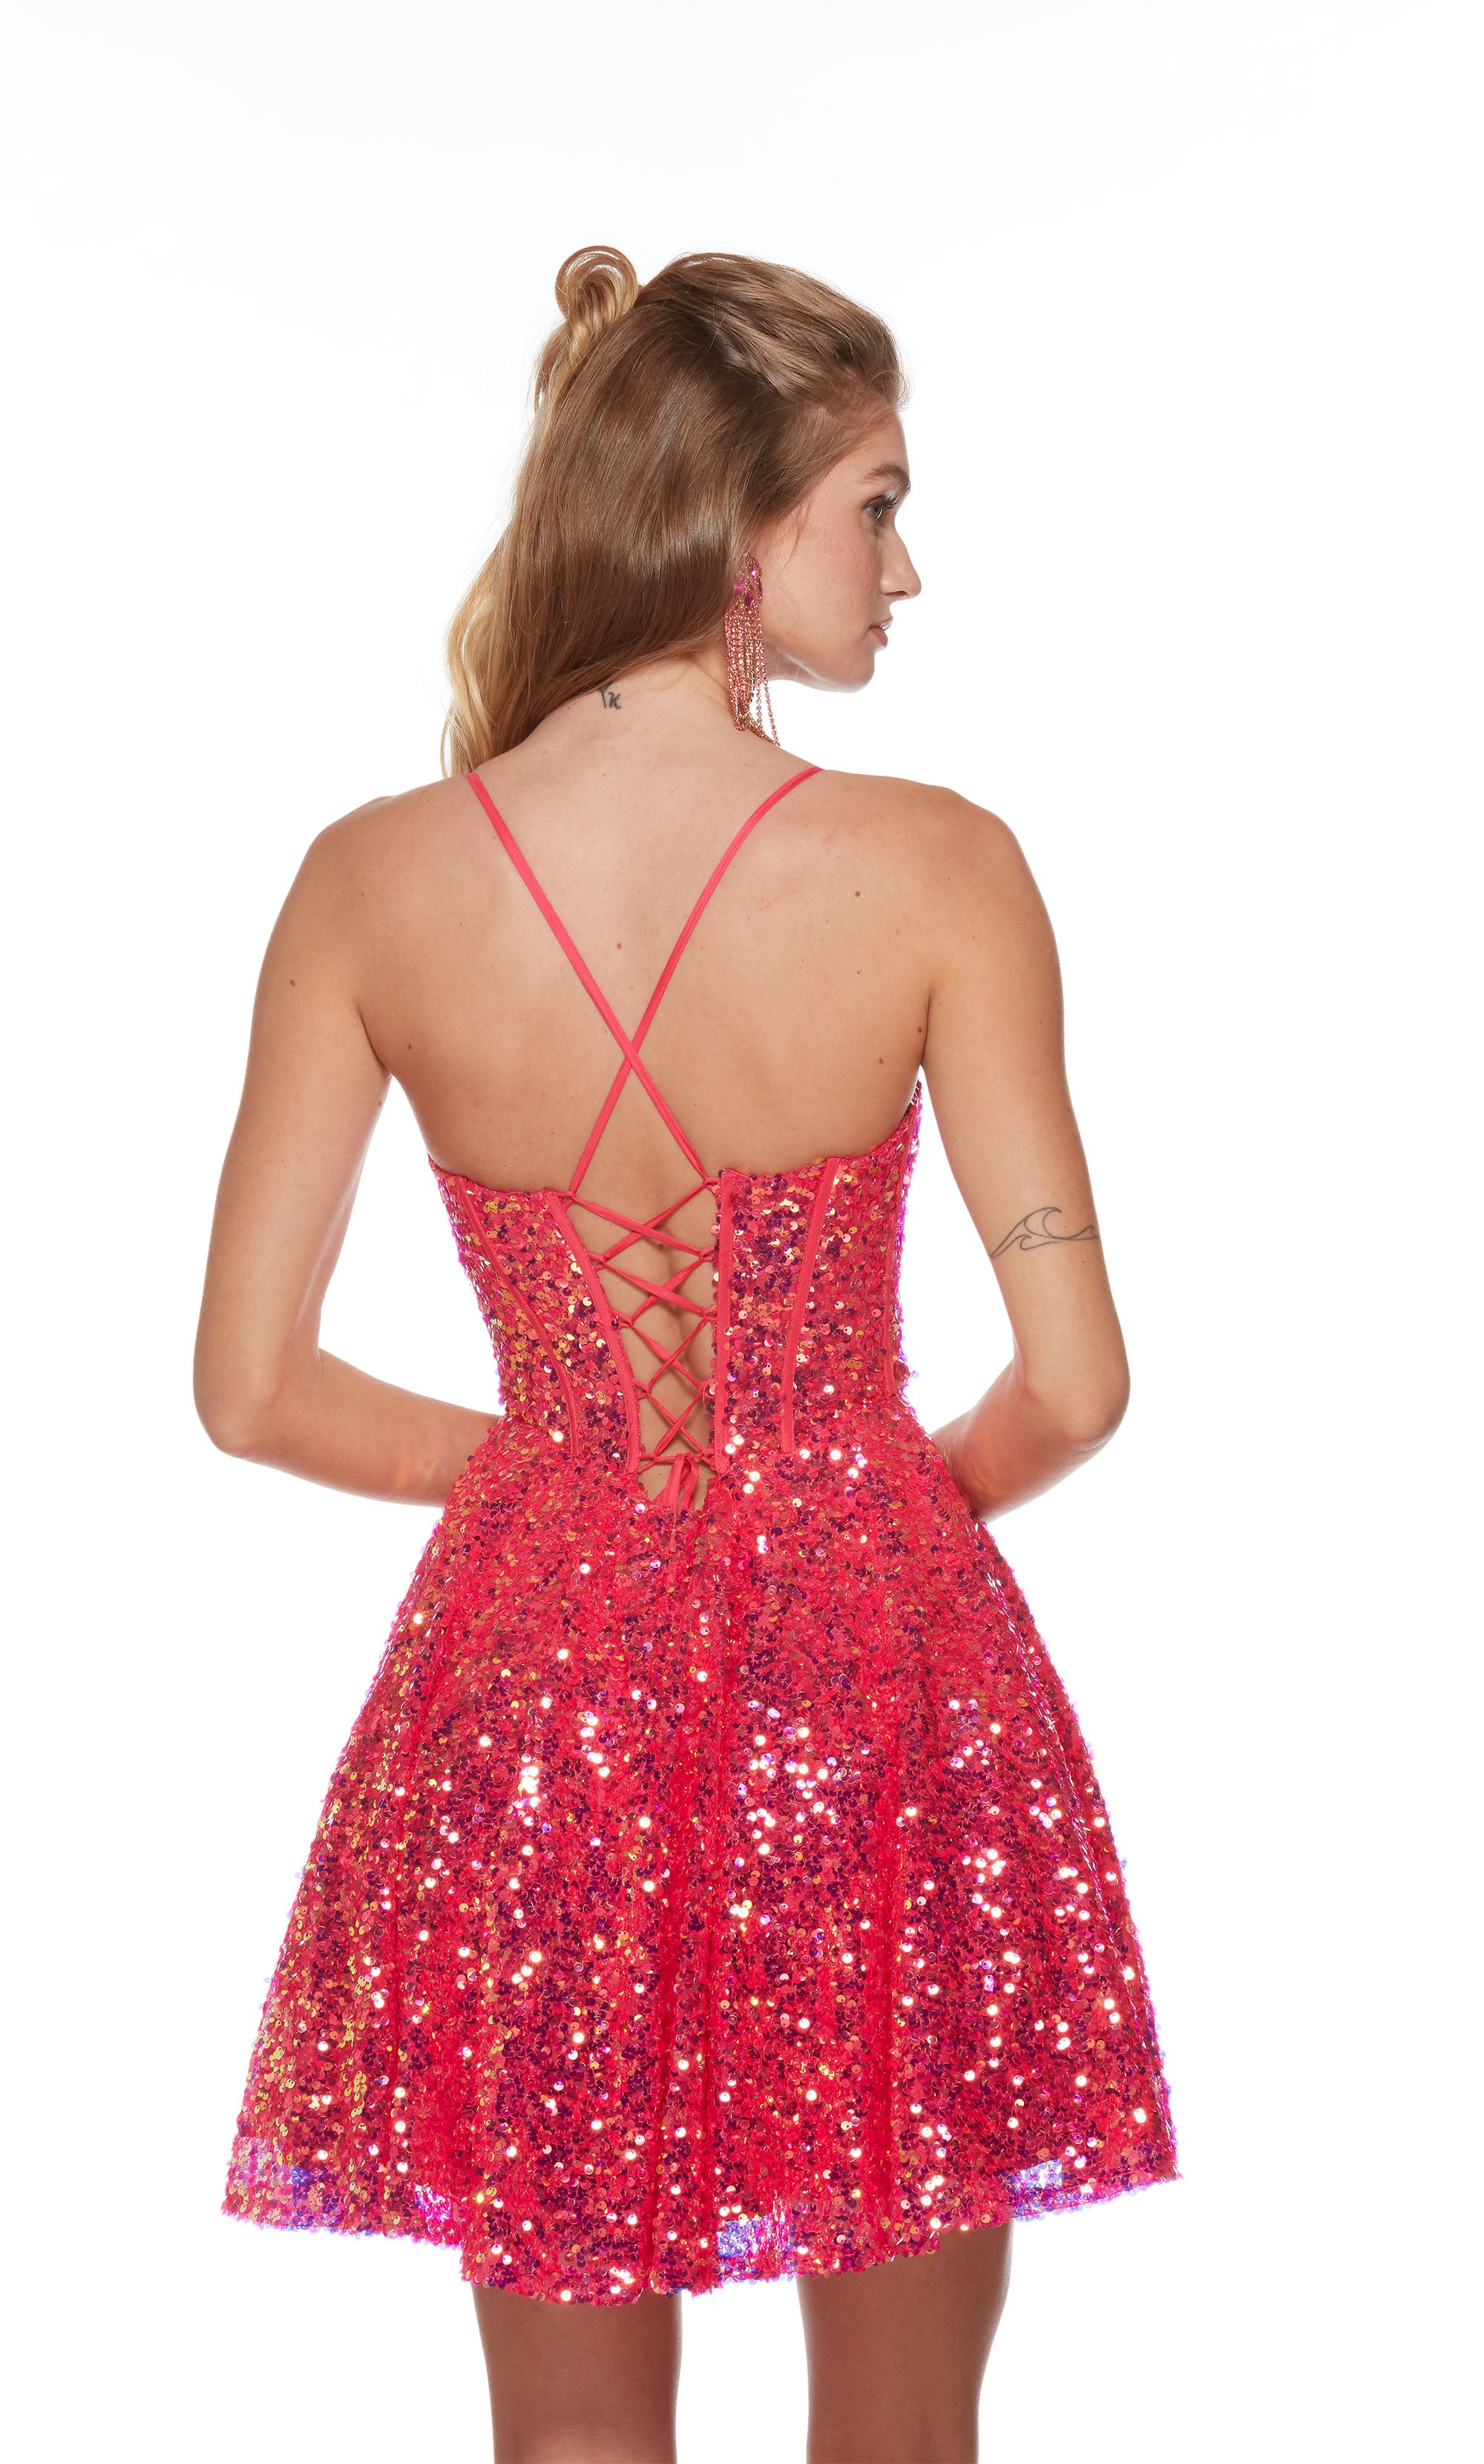 A short, hot pink sequined corset dress with a  V neckline, A-line silhouette, and lace up back for the perfect fit.